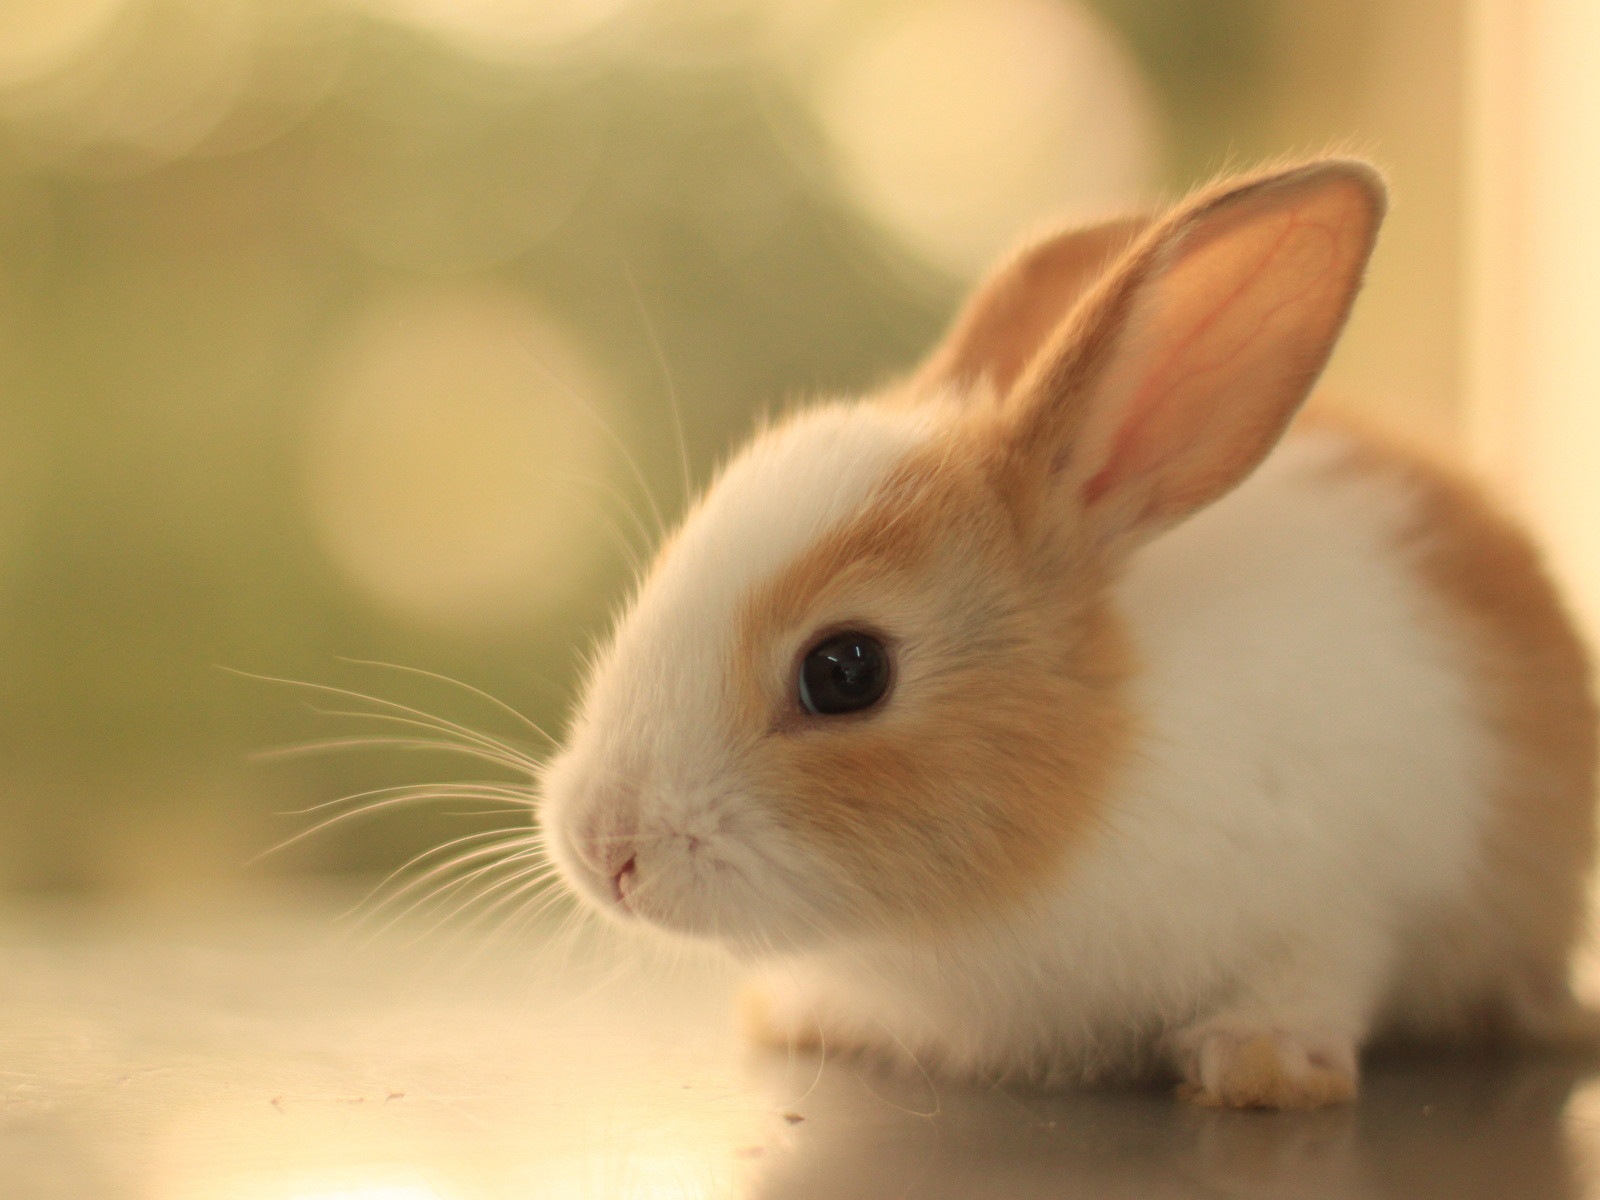 Furry animals, cute bunny HD wallpapers #20 - 1600x1200